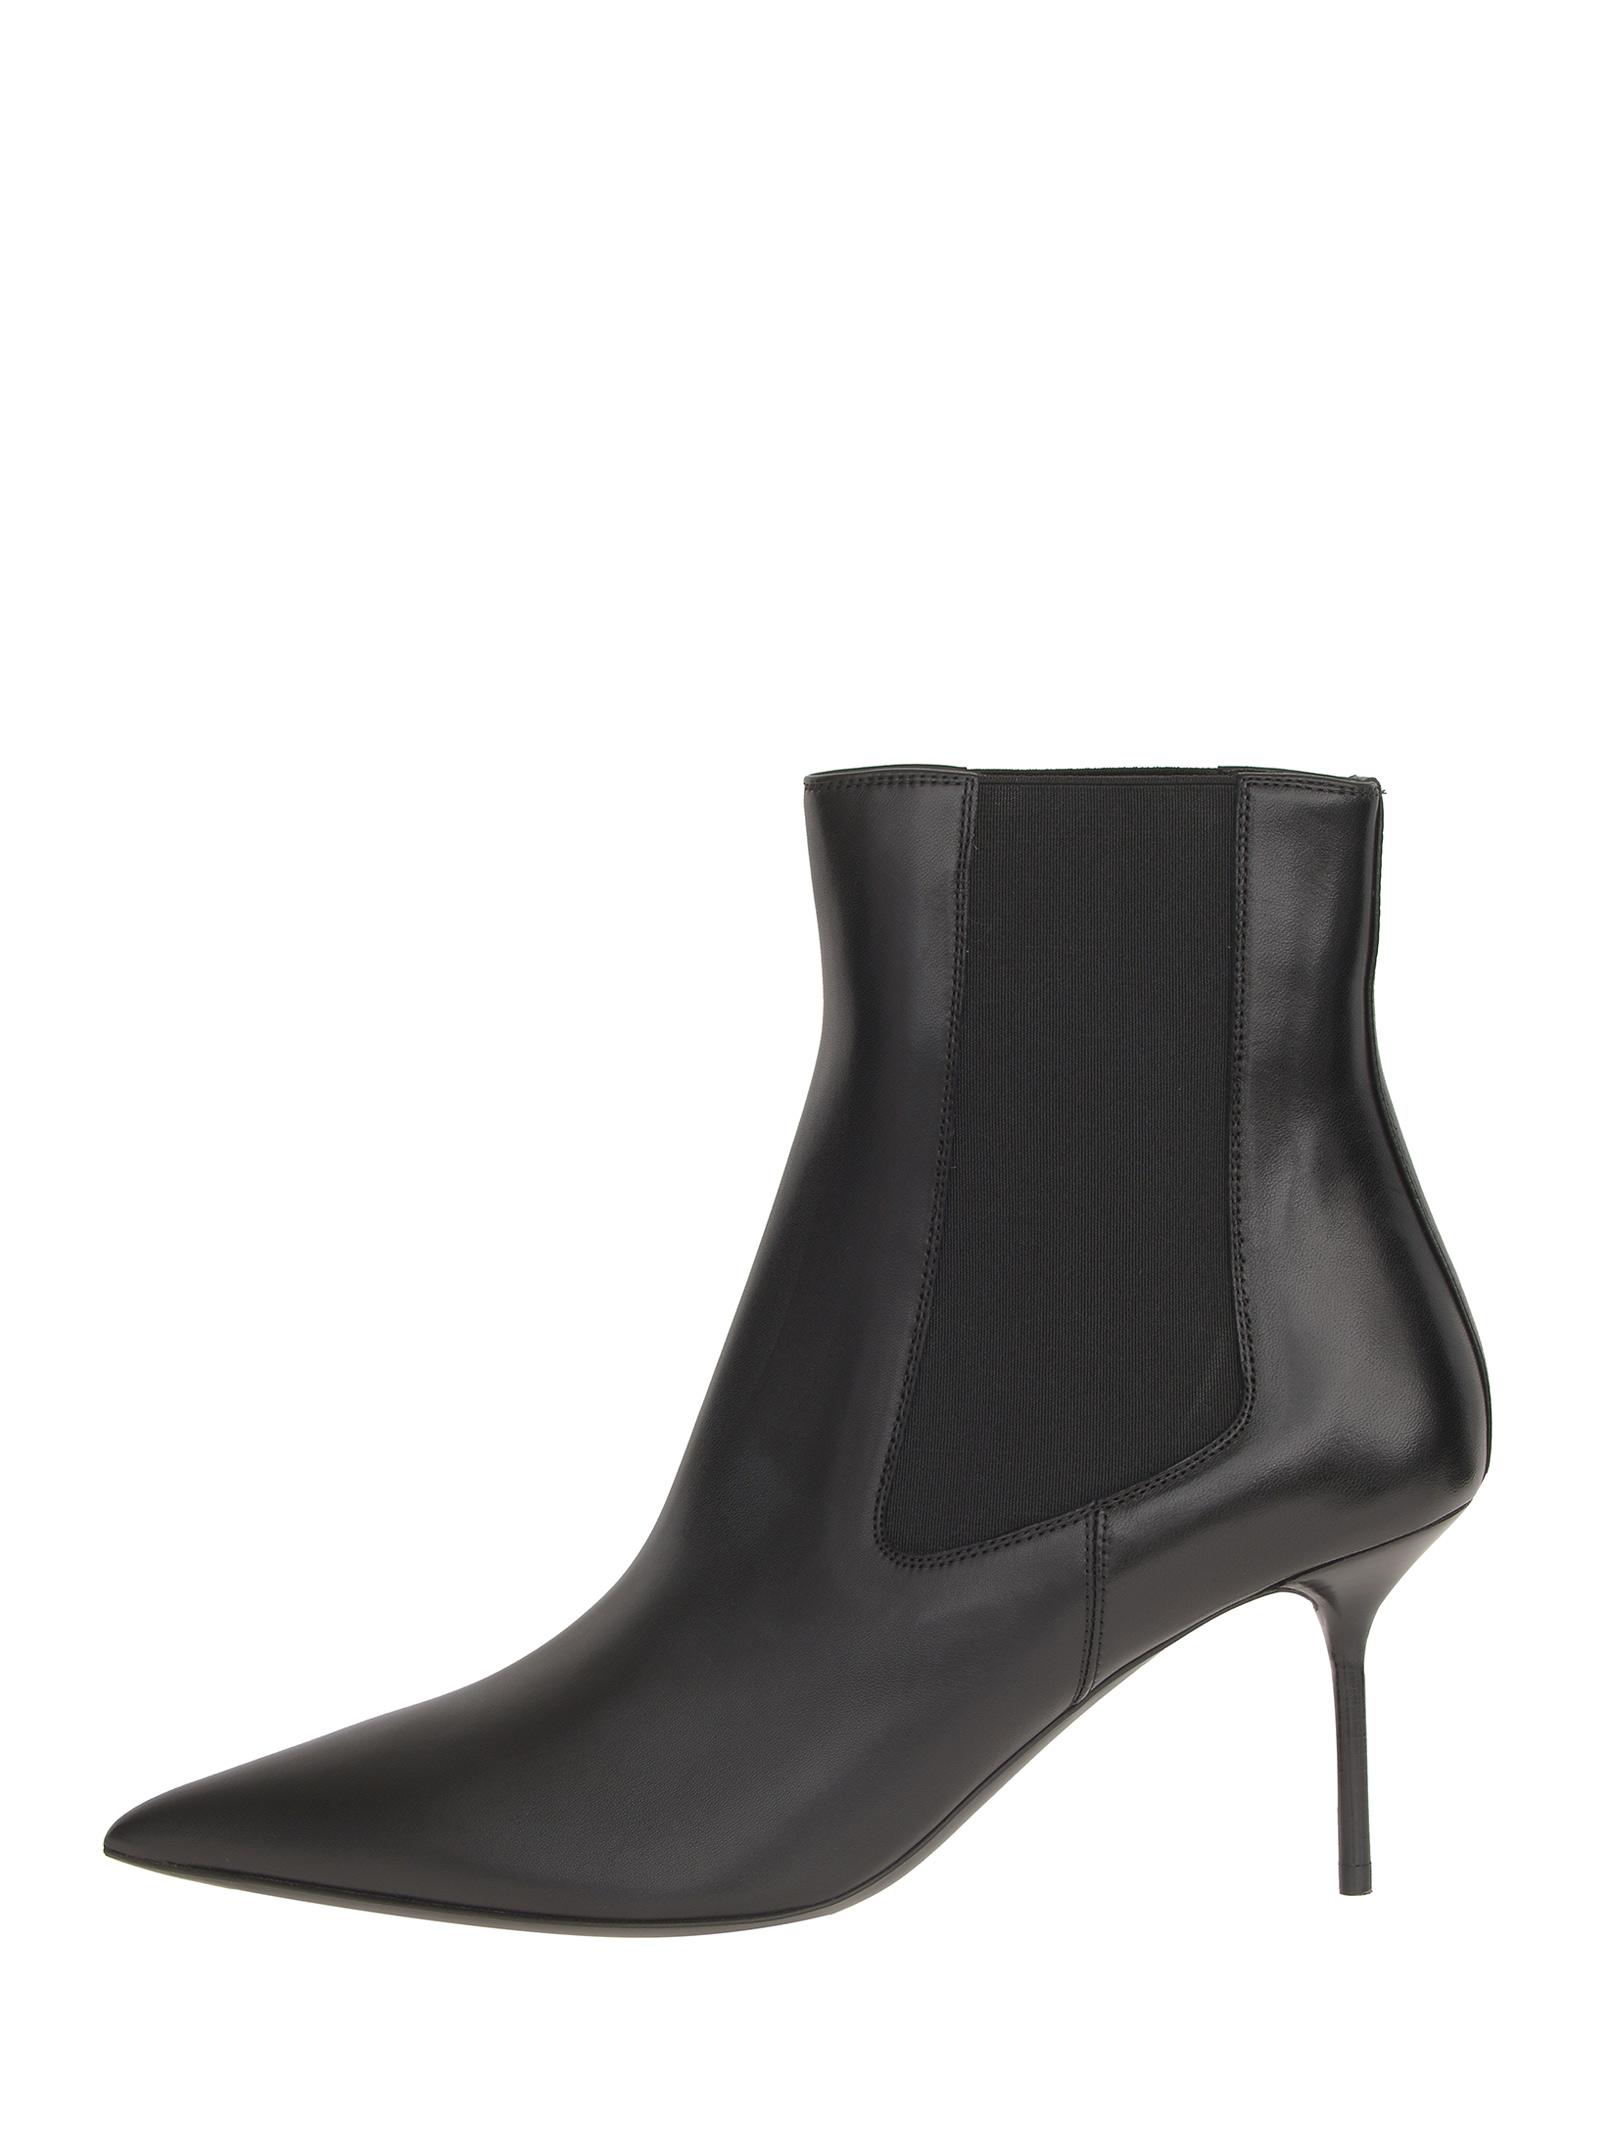 Tom Ford Black Leather Ankle Boots With Pointed Tip And Elastic Bands ...